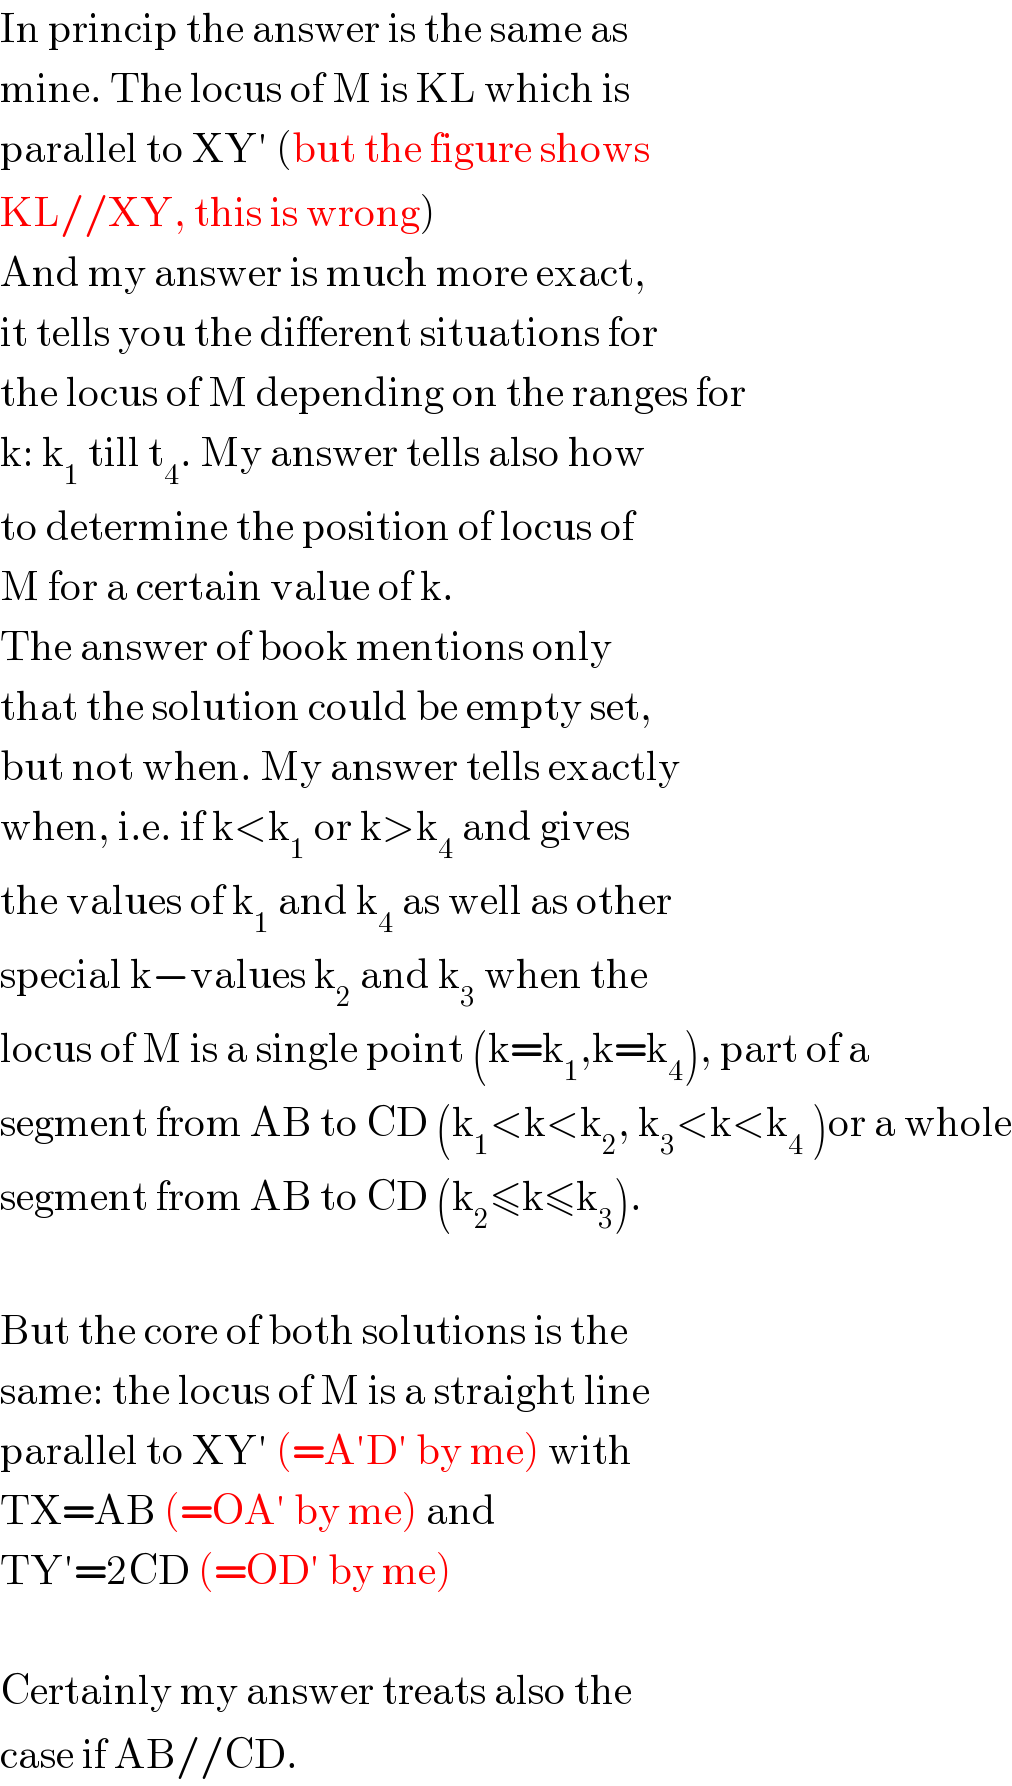 In princip the answer is the same as  mine. The locus of M is KL which is  parallel to XY′ (but the figure shows  KL//XY, this is wrong)  And my answer is much more exact,  it tells you the different situations for  the locus of M depending on the ranges for  k: k_1  till t_4 . My answer tells also how  to determine the position of locus of  M for a certain value of k.  The answer of book mentions only  that the solution could be empty set,  but not when. My answer tells exactly  when, i.e. if k<k_1  or k>k_4  and gives  the values of k_1  and k_4  as well as other  special k−values k_2  and k_3  when the  locus of M is a single point (k=k_1 ,k=k_4 ), part of a  segment from AB to CD (k_1 <k<k_2 , k_3 <k<k_4  )or a whole  segment from AB to CD (k_2 ≤k≤k_3 ).    But the core of both solutions is the  same: the locus of M is a straight line  parallel to XY′ (=A′D′ by me) with  TX=AB (=OA′ by me) and  TY′=2CD (=OD′ by me)    Certainly my answer treats also the  case if AB//CD.  